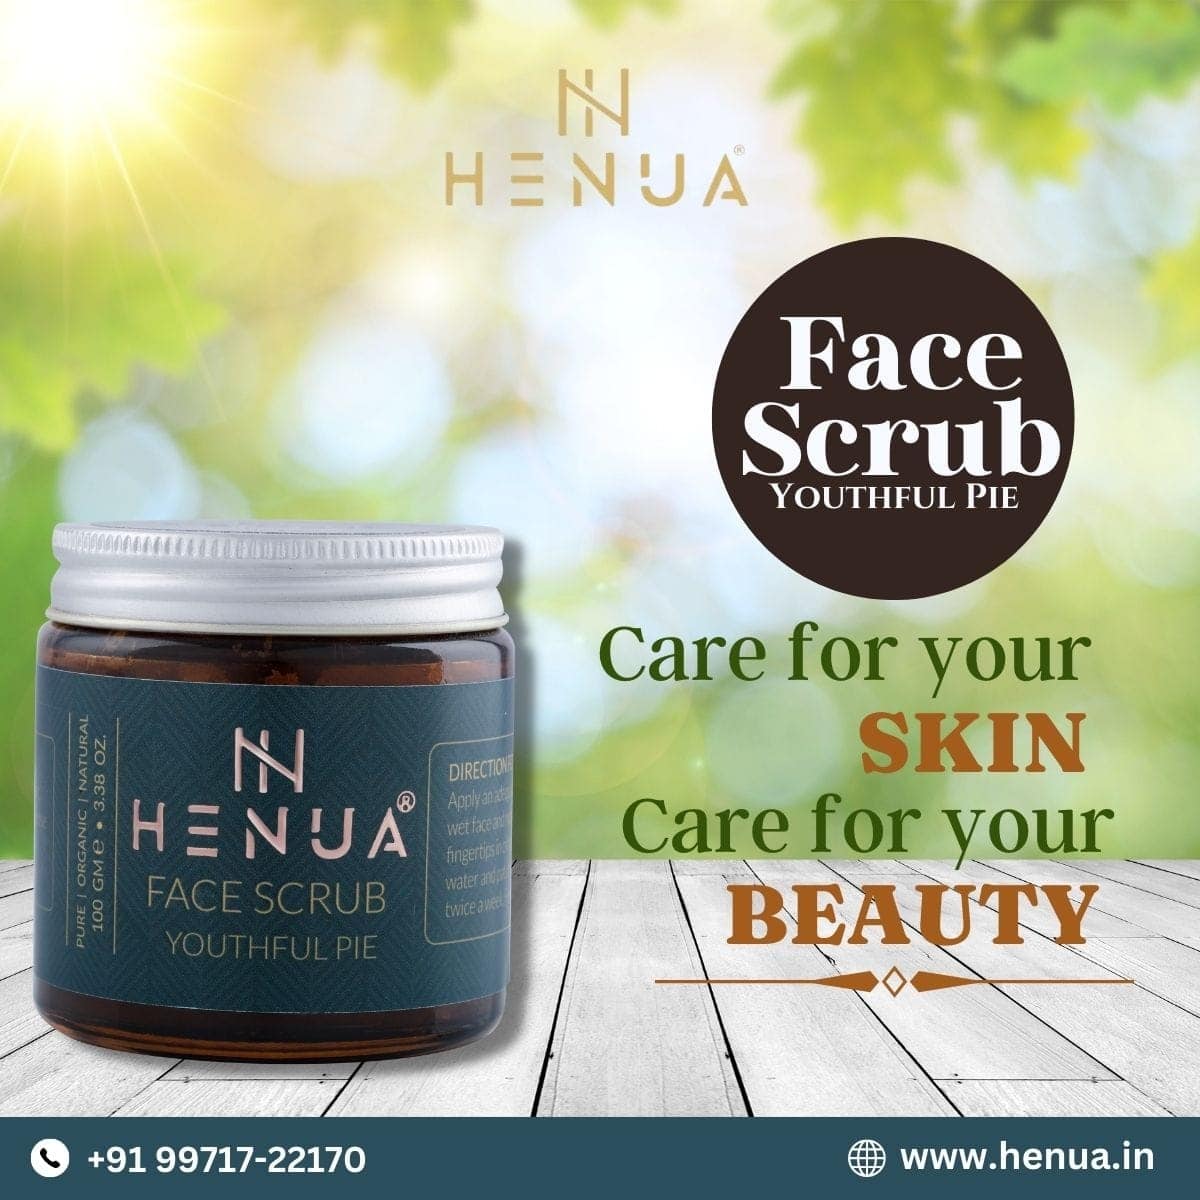 Henua-Face-Scrub-For-The-Care-Of-Your-Body-Naturally